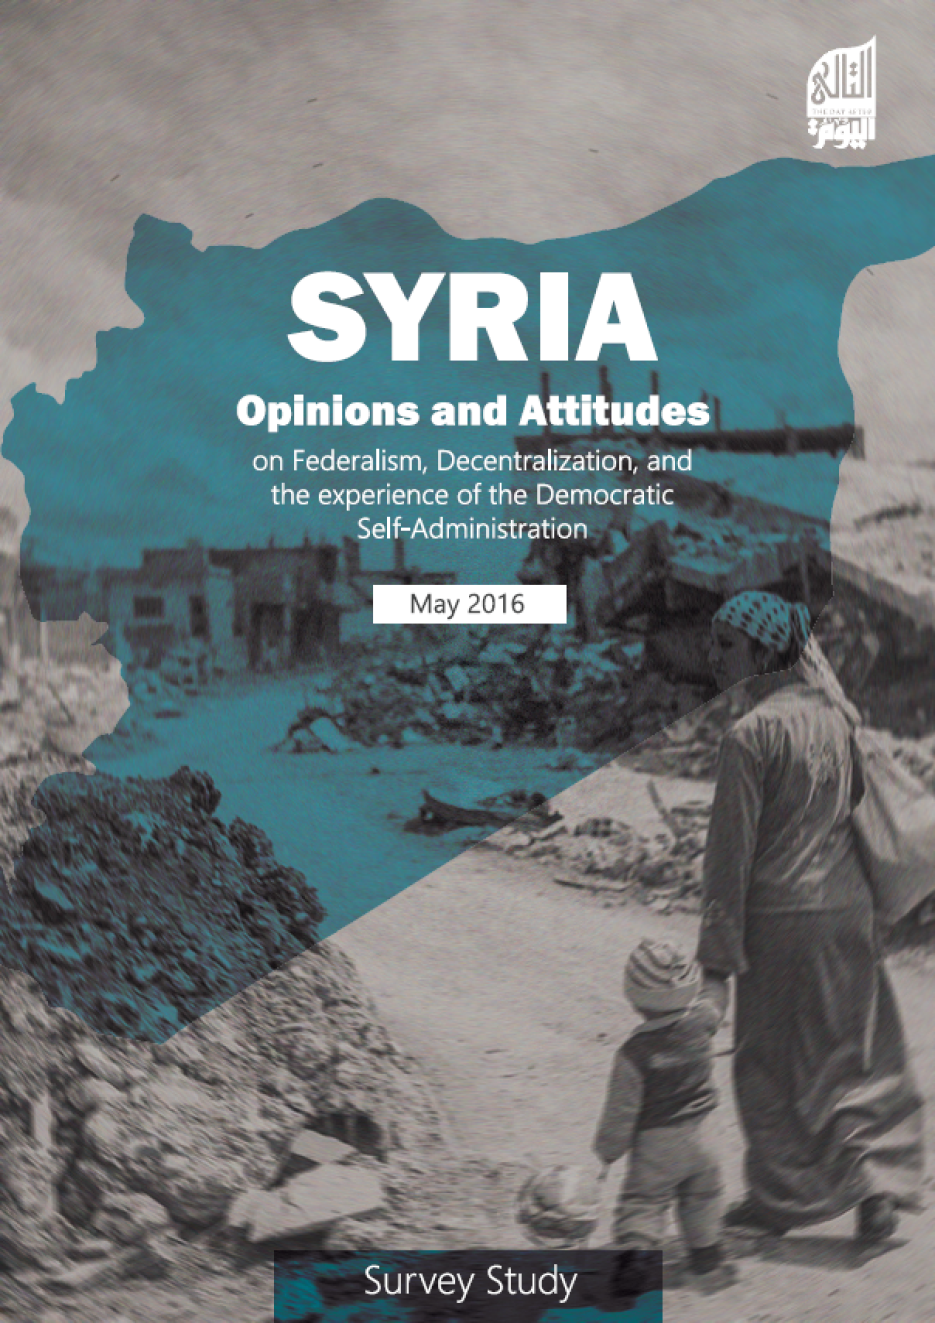 Syria: Opinions and Attitudes on Federalism, Decentralization, and the Emergence of Democratic Self-Administration